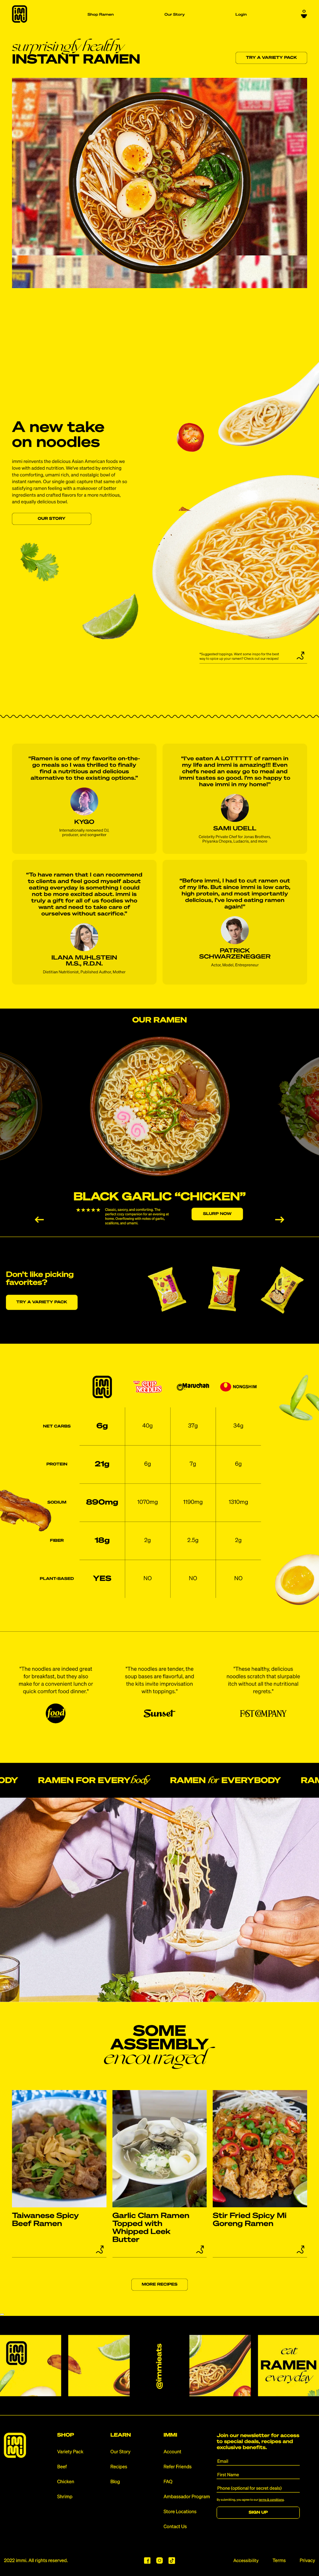 ecommerce landing page example of Instant Ramen Reinvented - immi